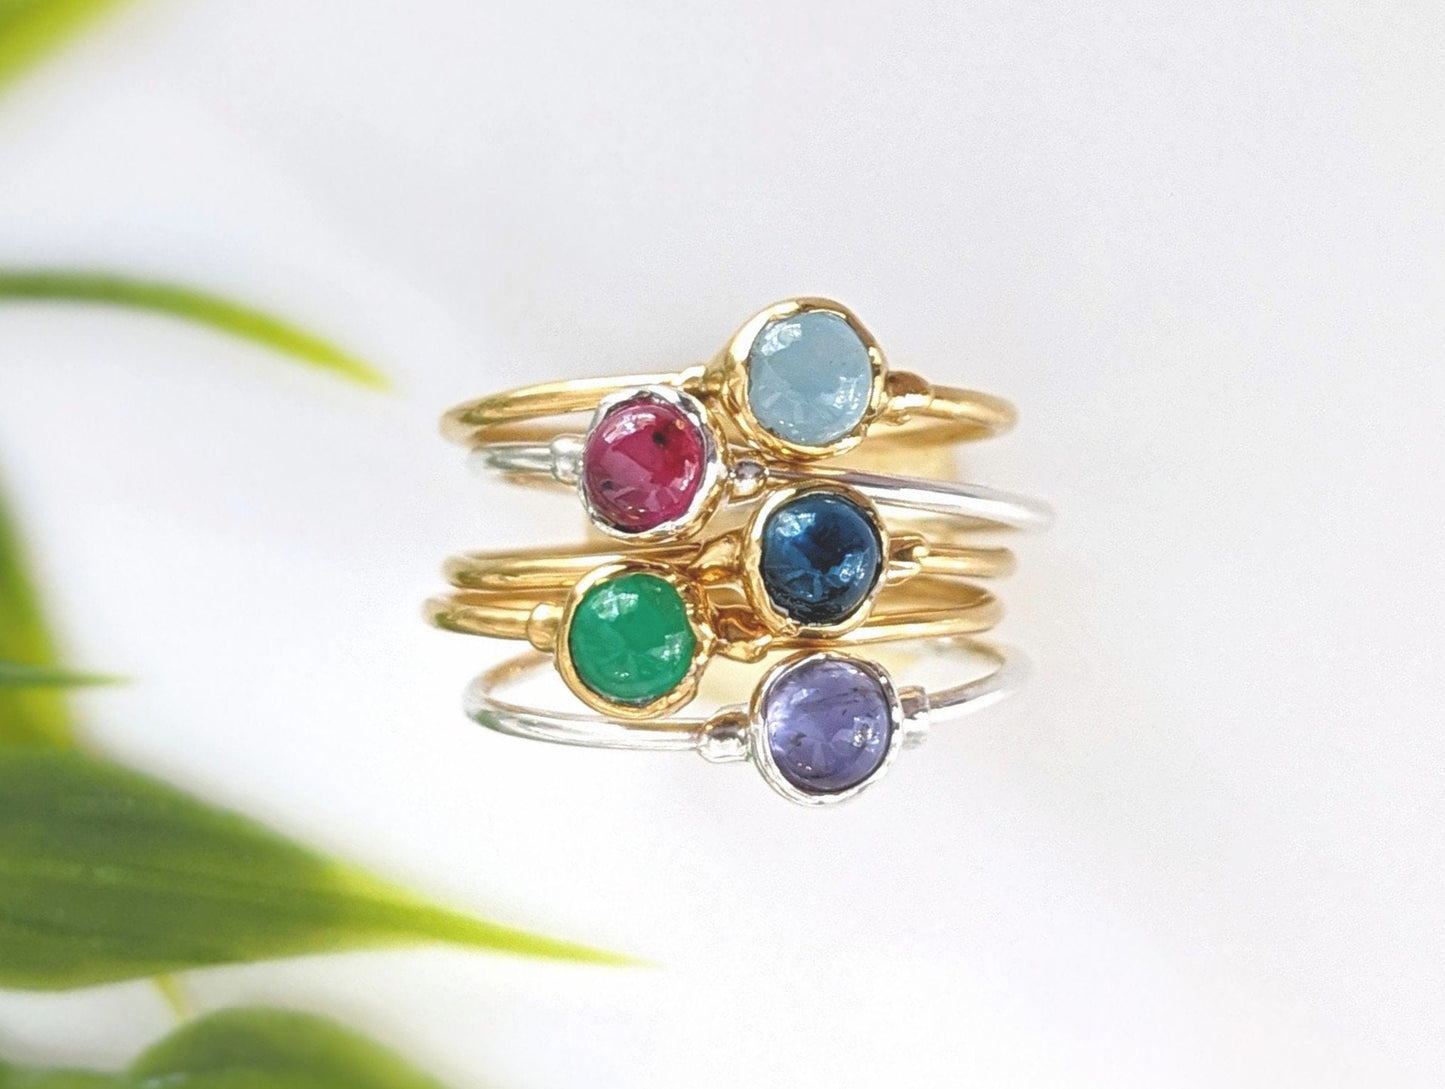 Dainty Birthstone stacking rings in unique Sterling Silver or 18k Gold setting